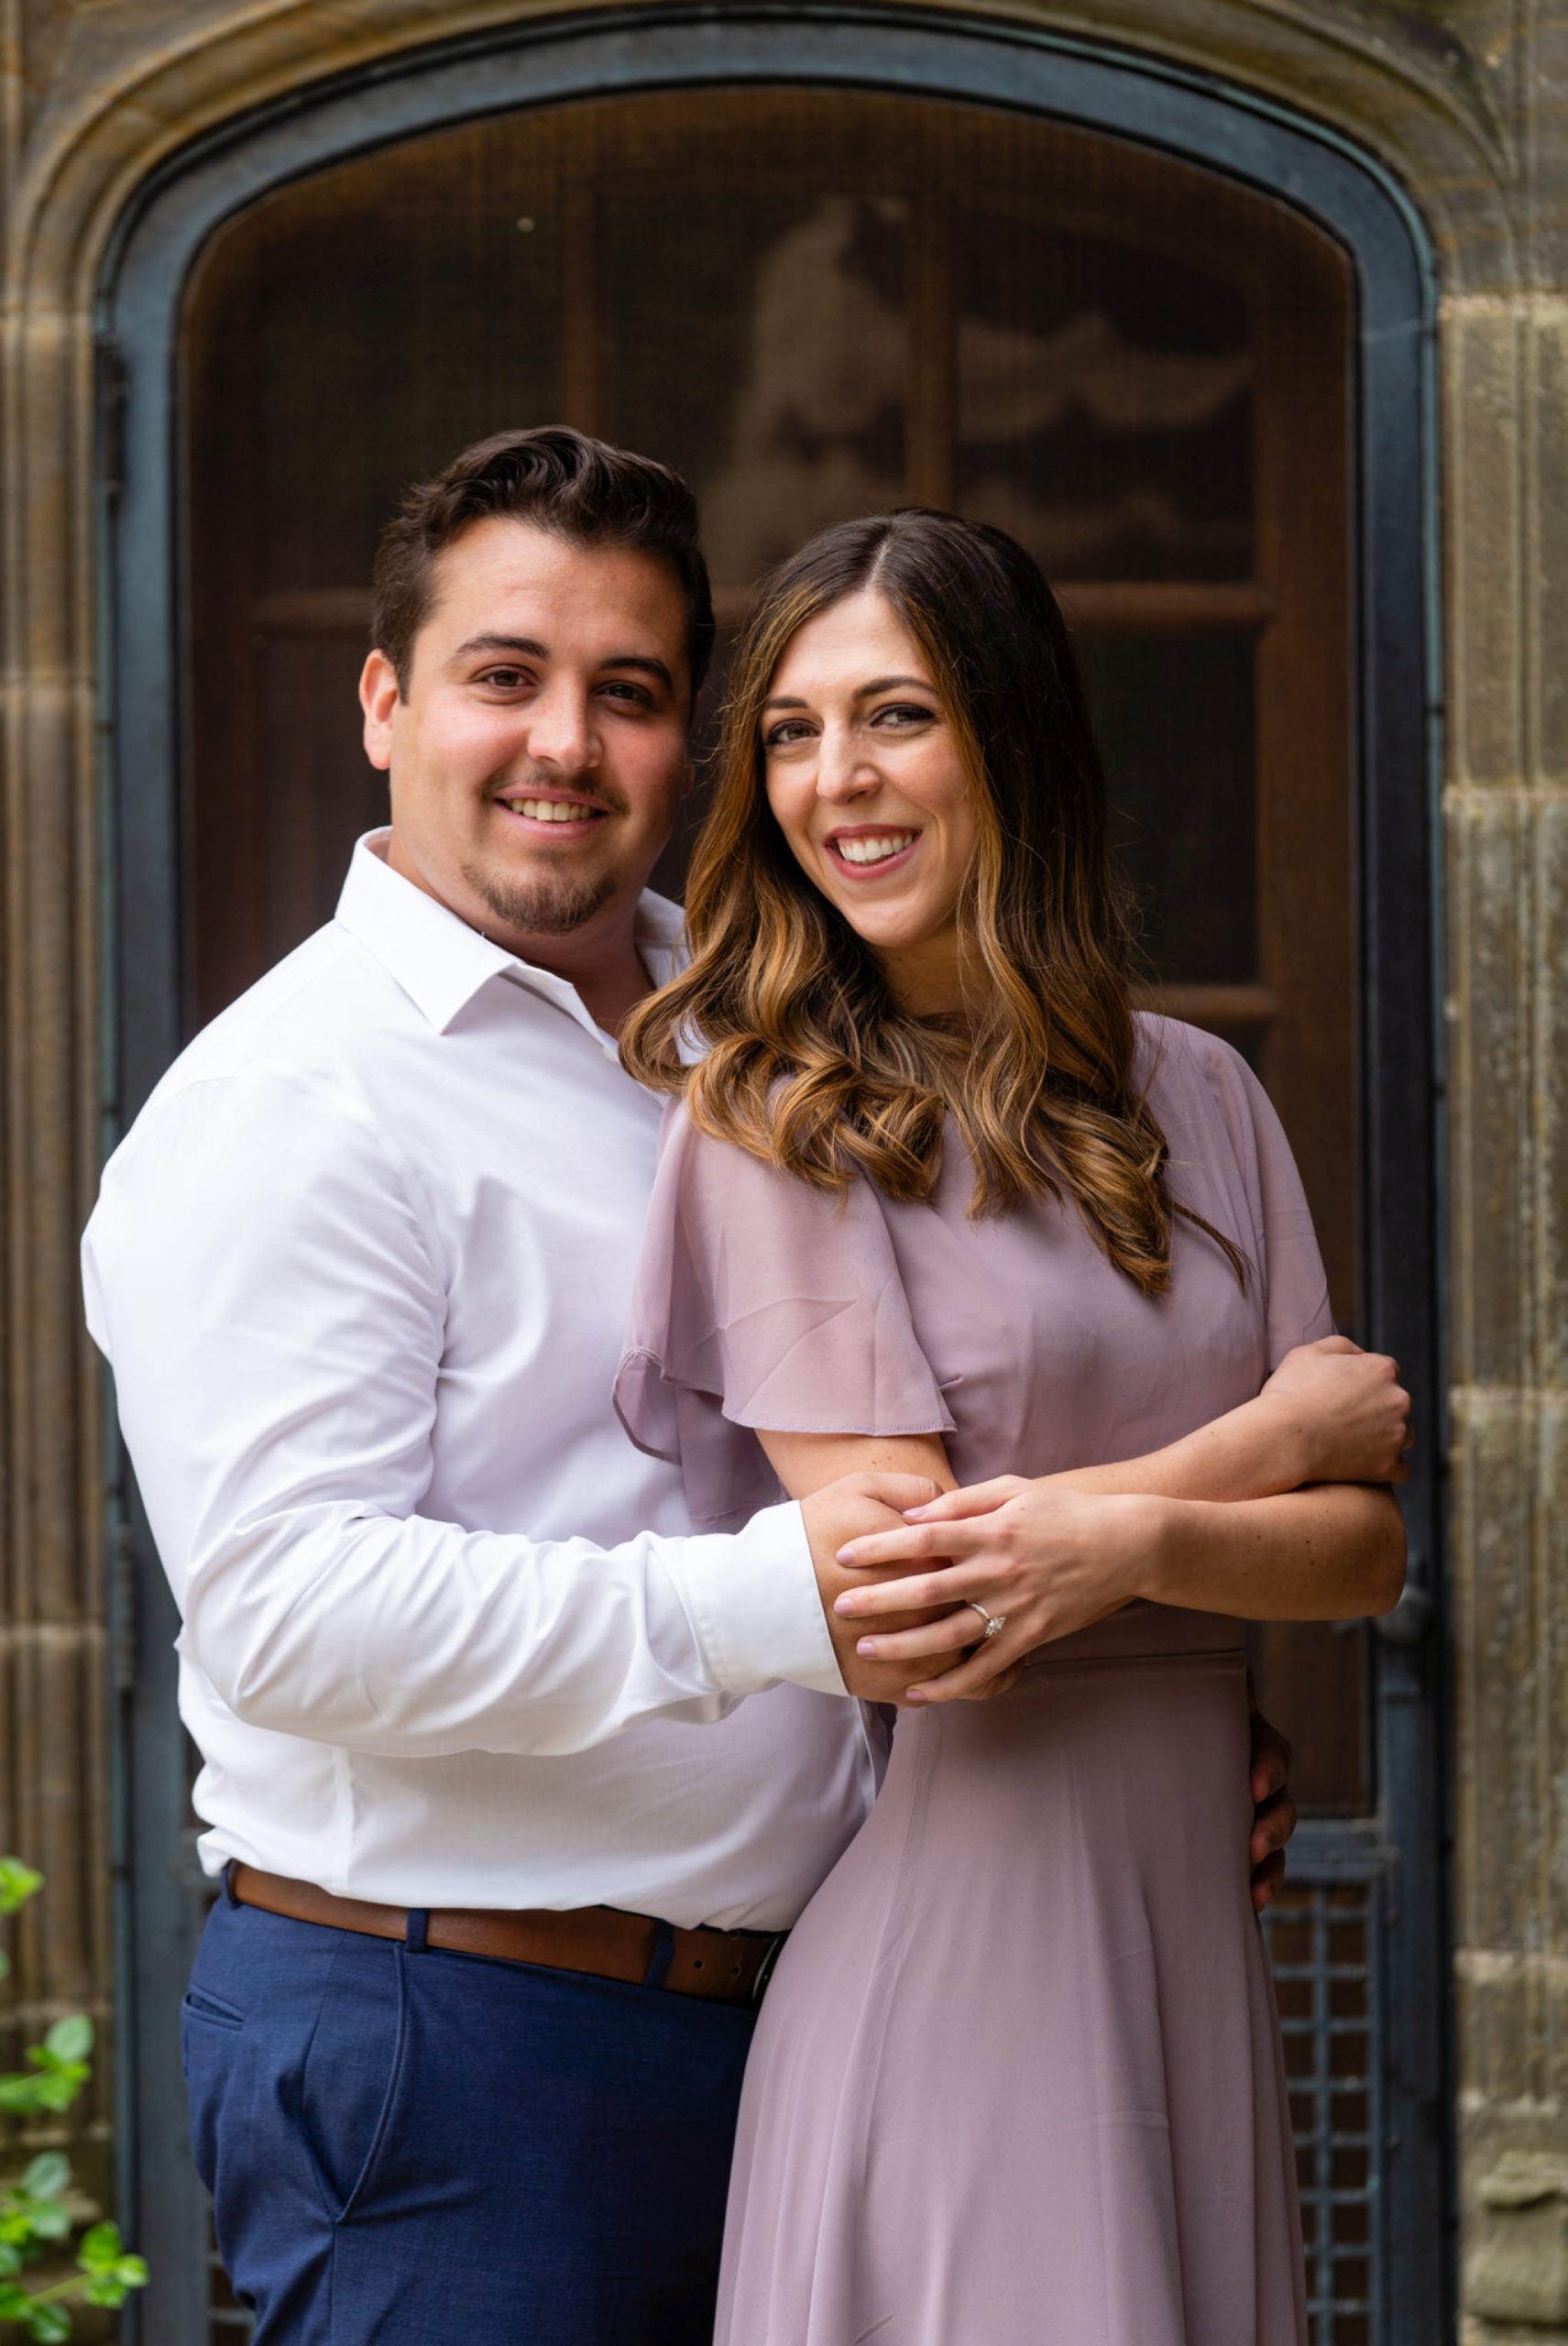 Edsel and Eleanor Ford Estate Engagement session 